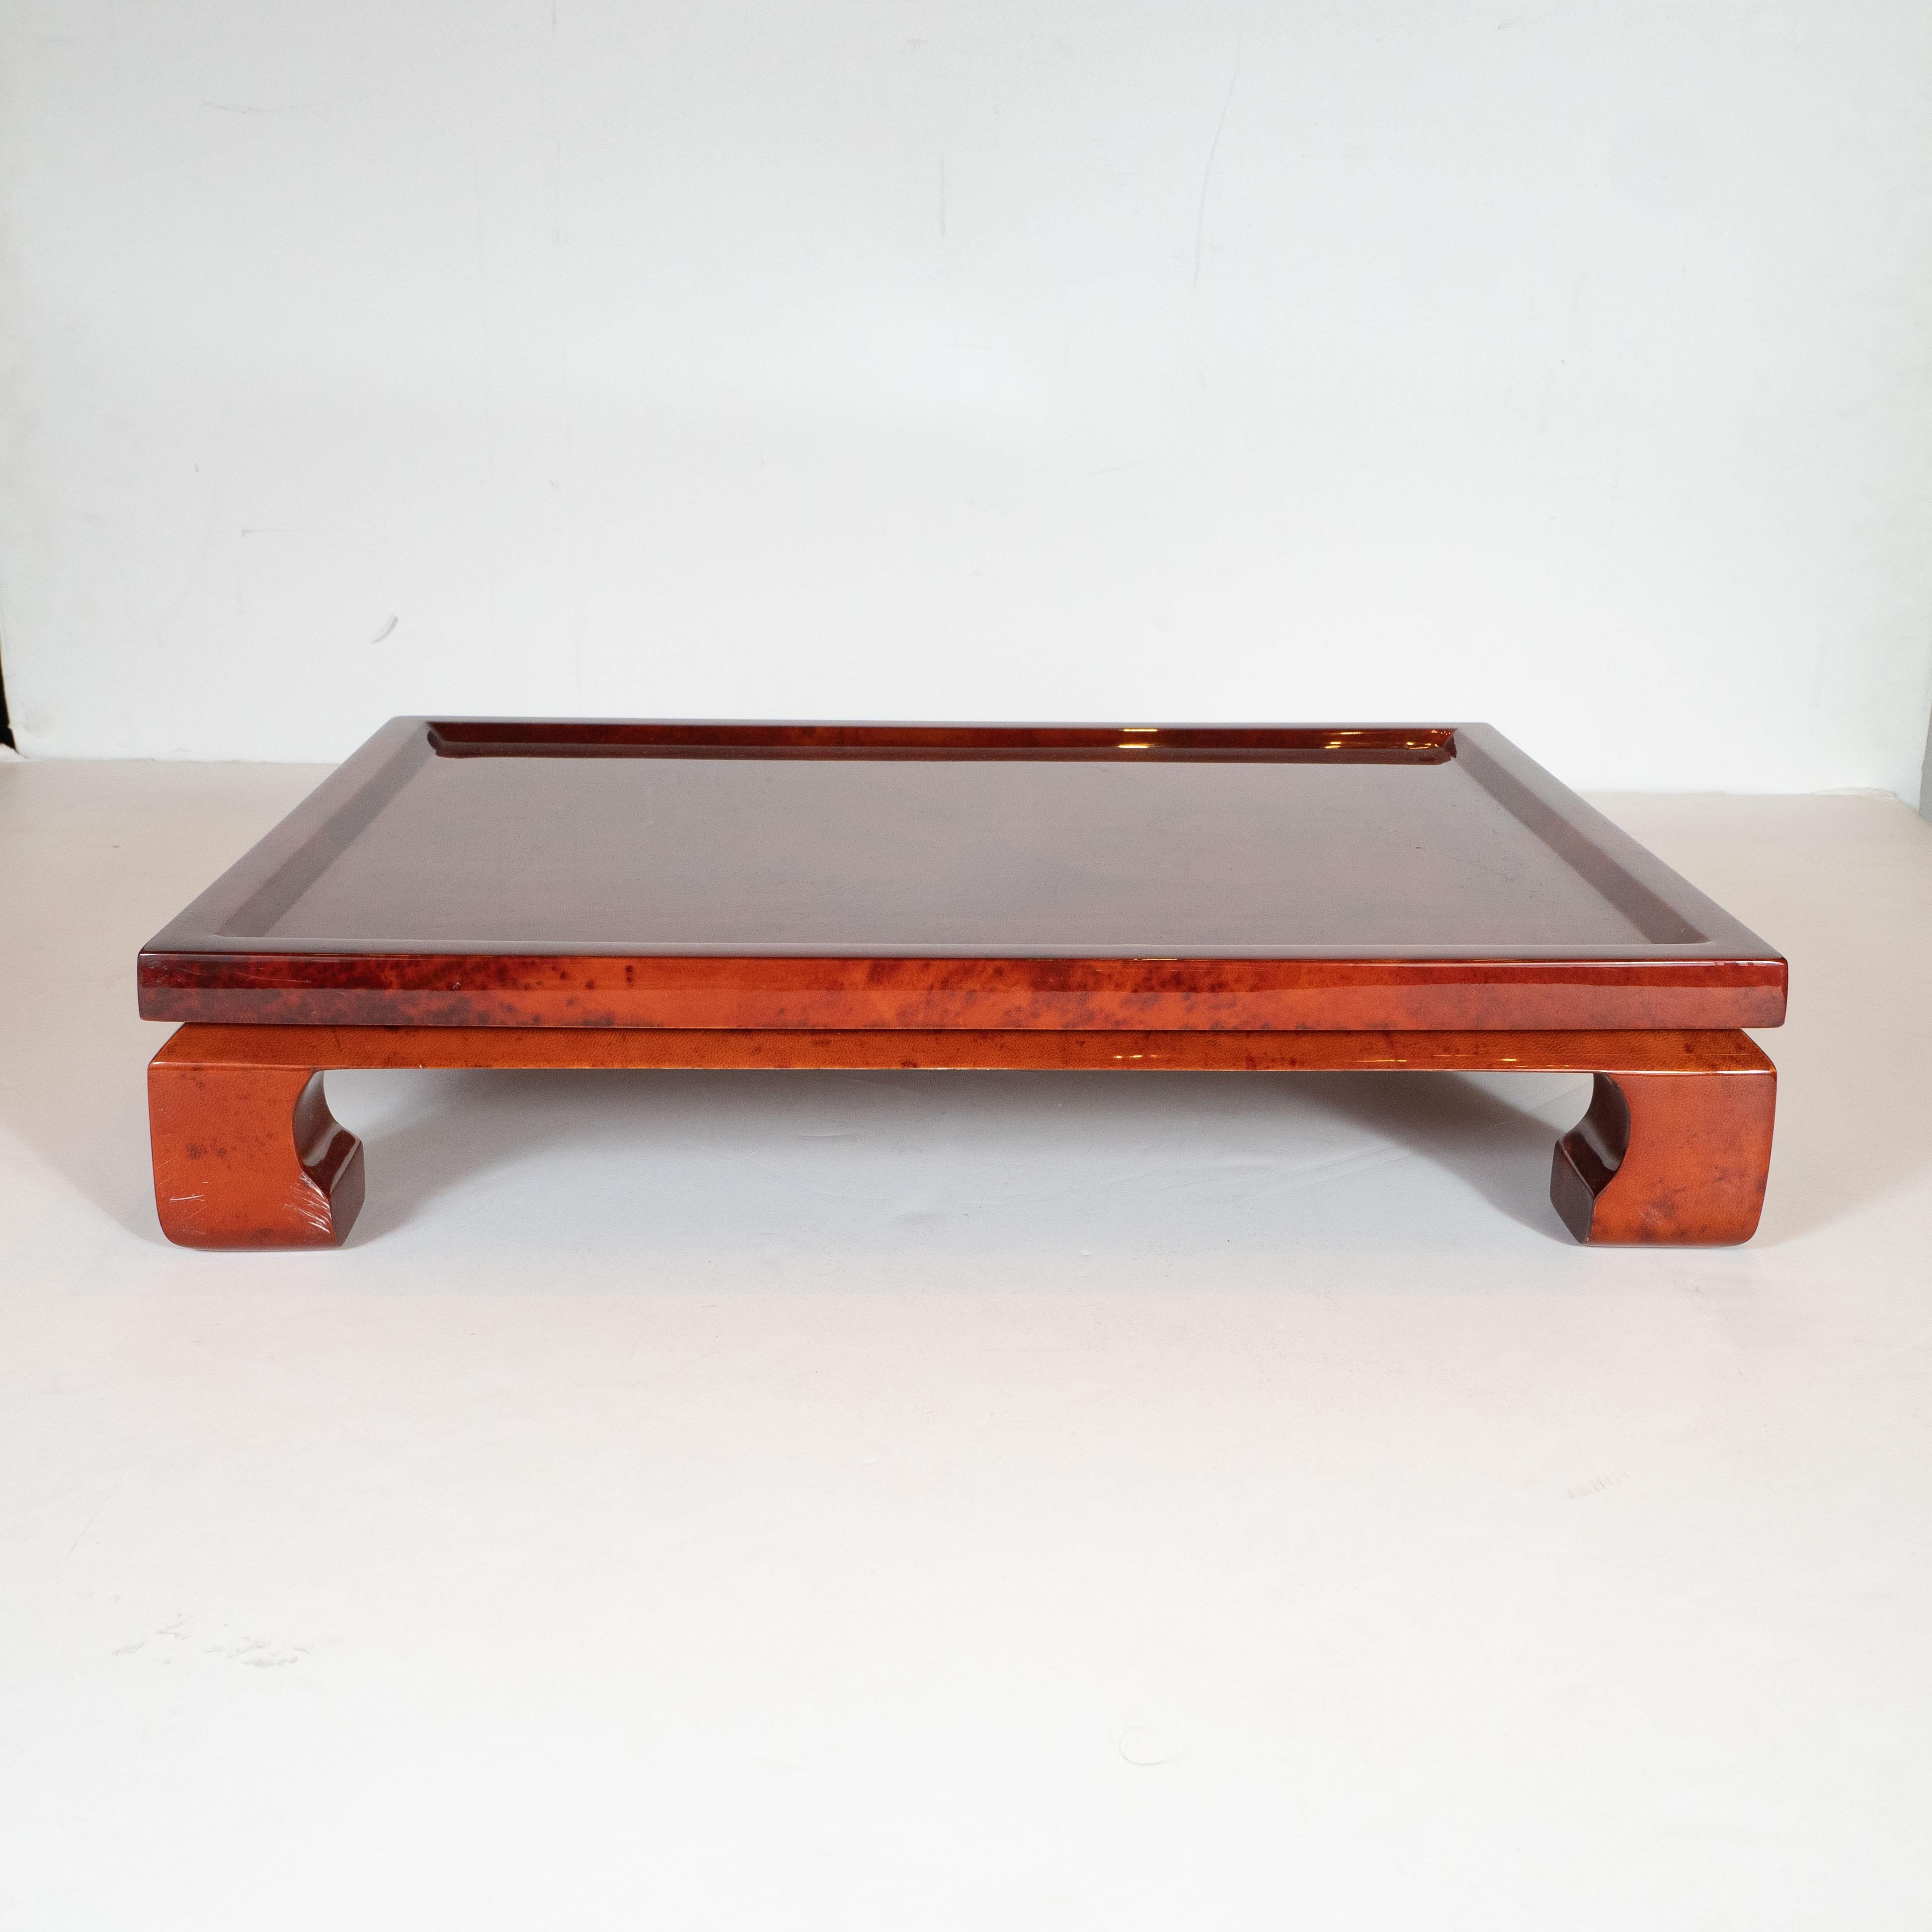 This beautiful Mid-Century Modern bar tray was handmade in Colombia, circa 1980. It features a pagoda form with stylized chinoiserie style legs; a volumetric rectangular body and a beveled apron- all realized in lacquered goatskin of a rich chestnut